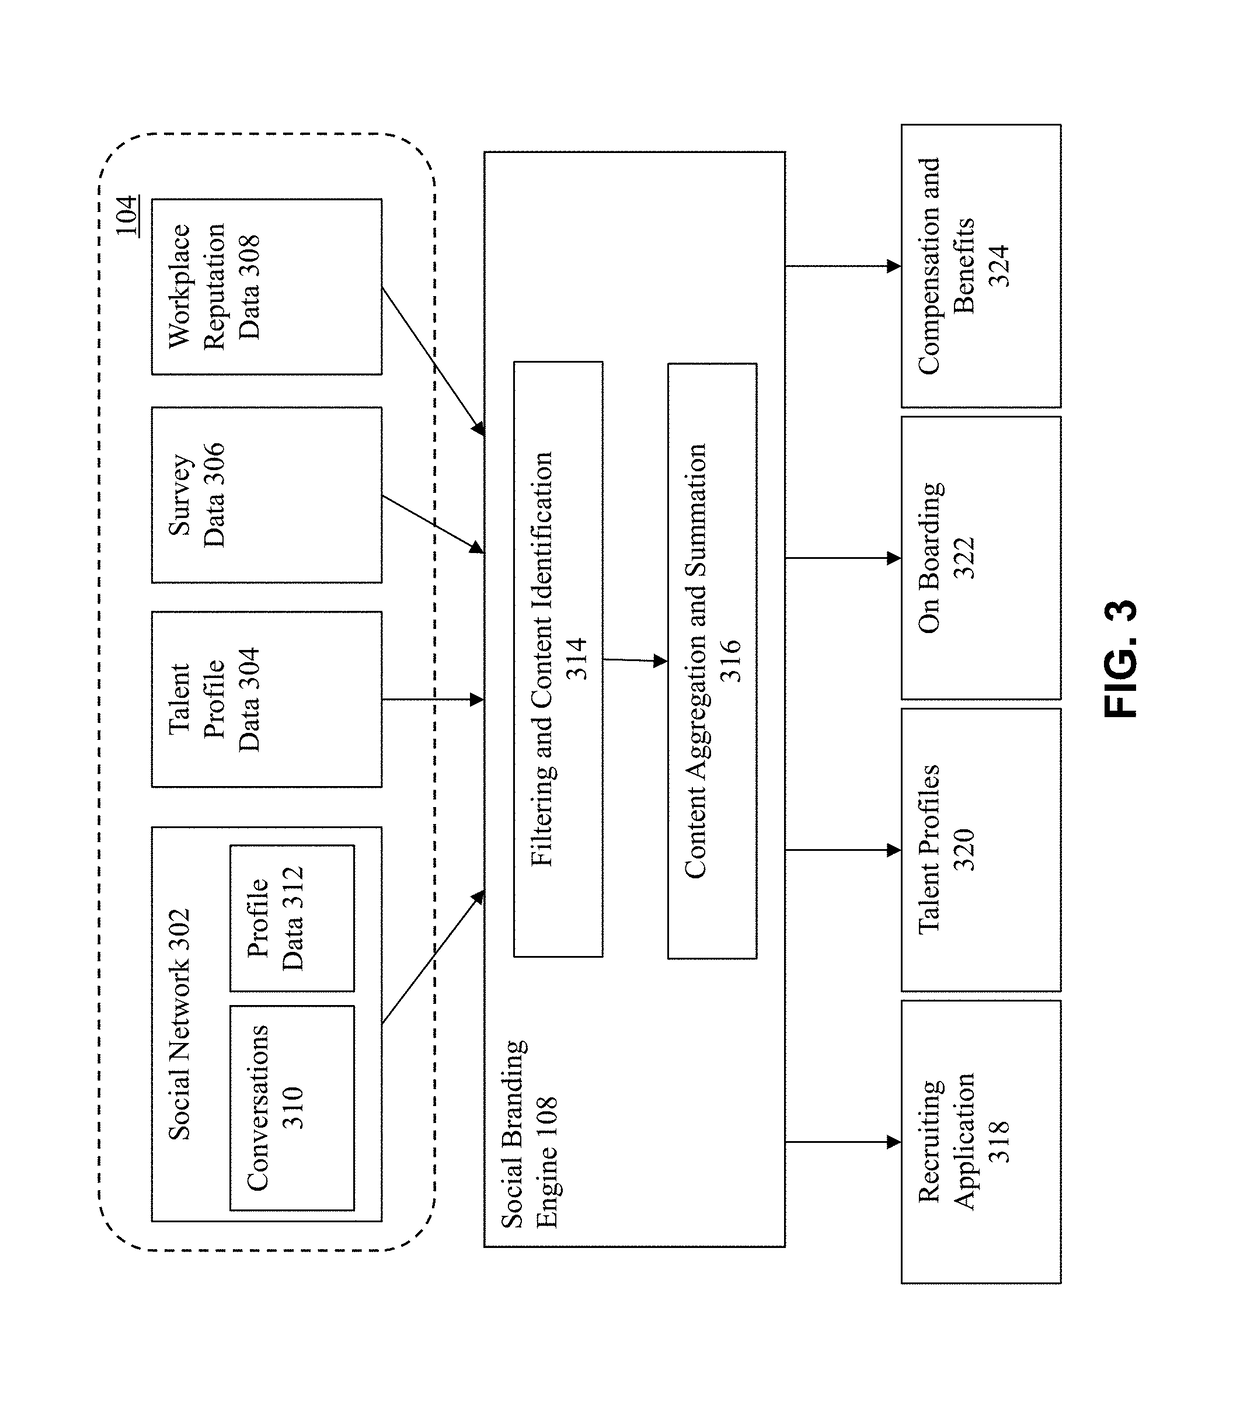 Method and system for supplementing job postings with social network data